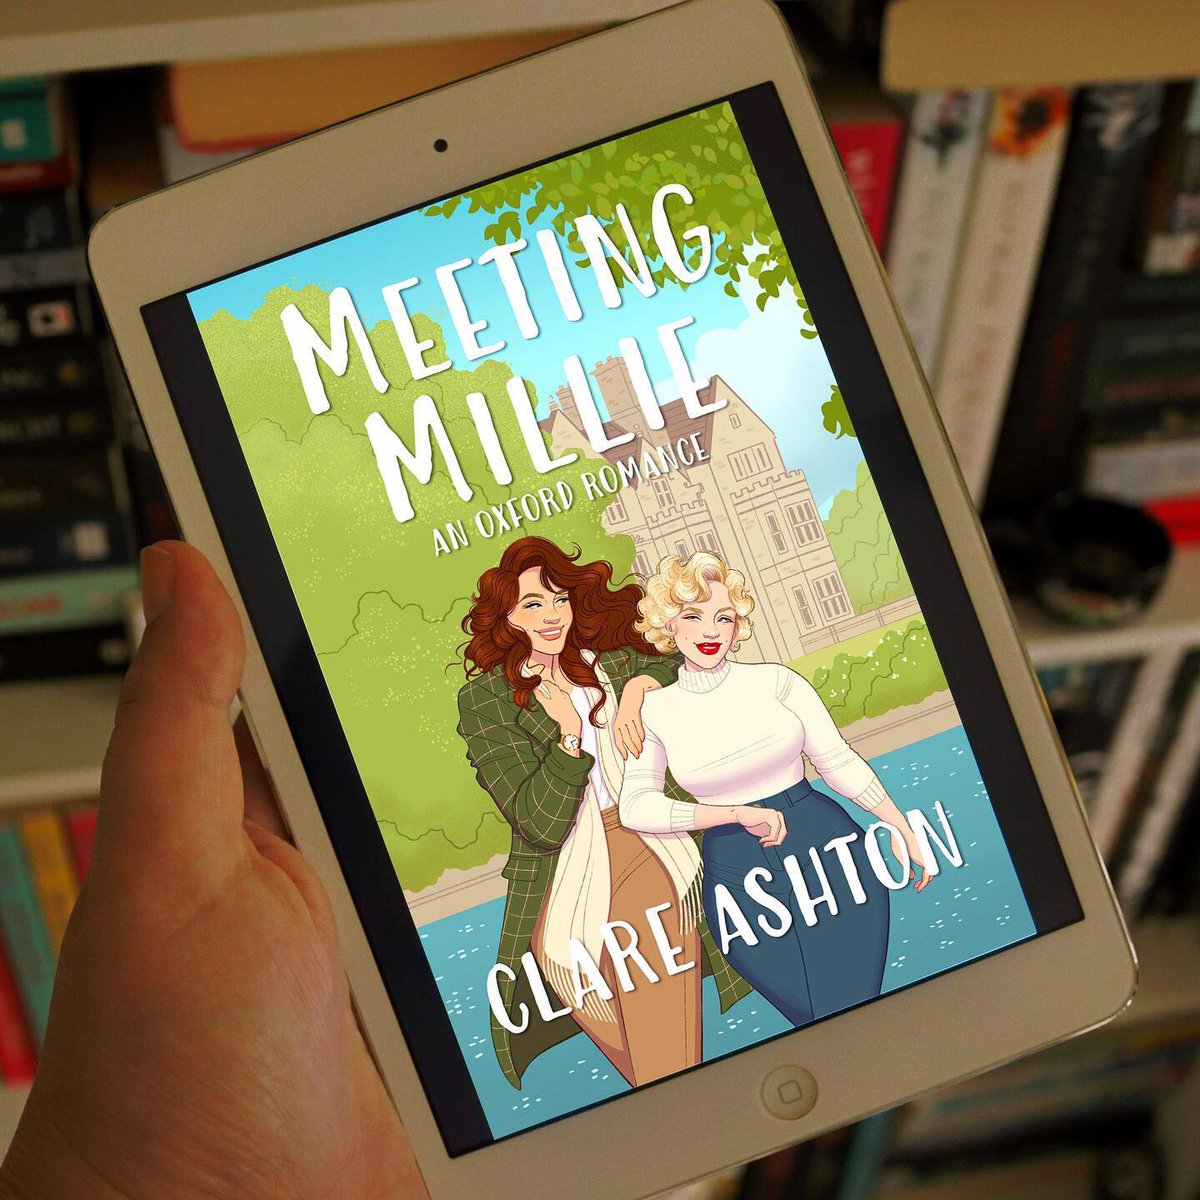 📚new post📚
MEETING MILLIE | BOOK REVIEW
A sweet Sapphic friends-to-lovers romance set in picturesque Oxford. 👩🏻‍❤️‍💋‍👩🏼

🔗READ: bit.ly/Review-Meeting…

#MeetingMillie #ClareAshton #bookreview #sapphicromance #romancebooks #queerbooks #queerpride #bookblogger